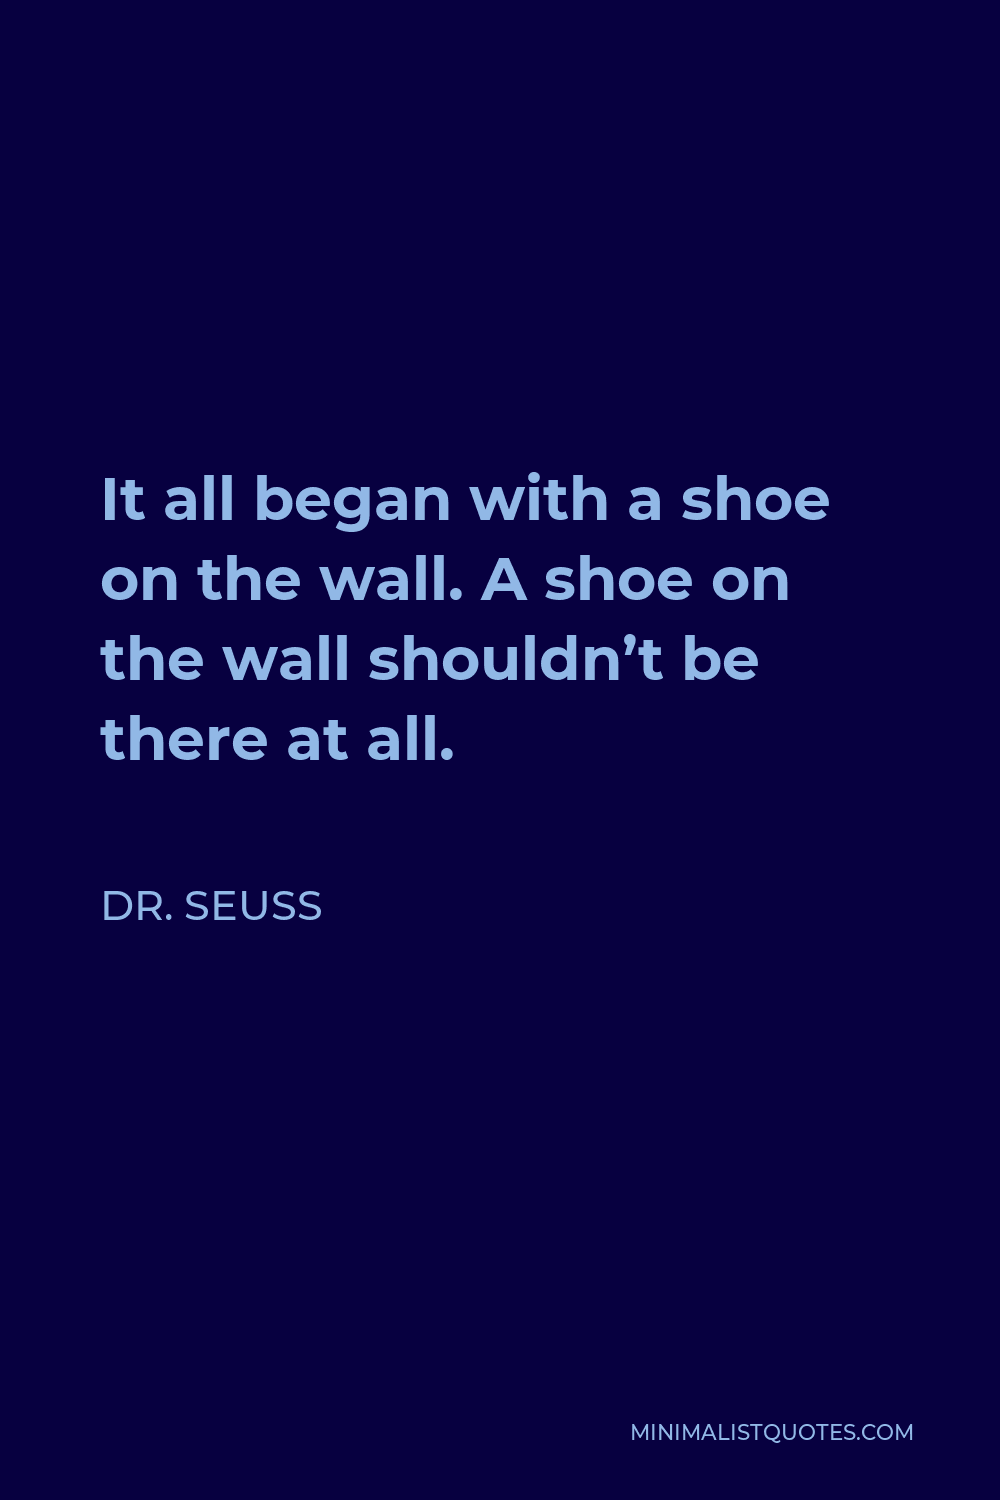 Dr. Seuss Quote - It all began with a shoe on the wall. A shoe on the wall shouldn’t be there at all.